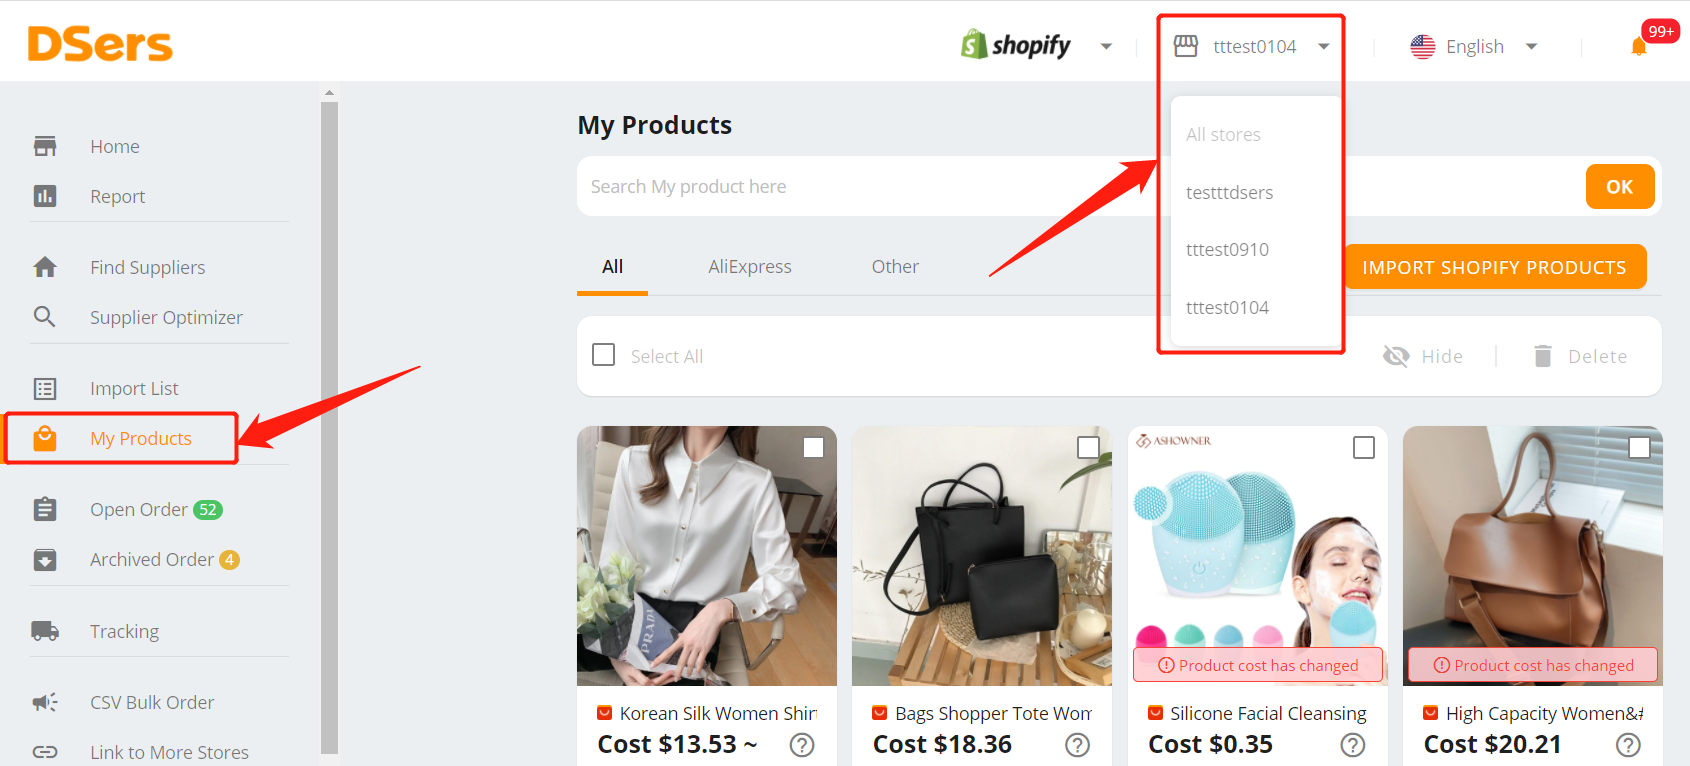 Why I see "All Stores", but not my shop name - Select Different Stores - Shopify DSers